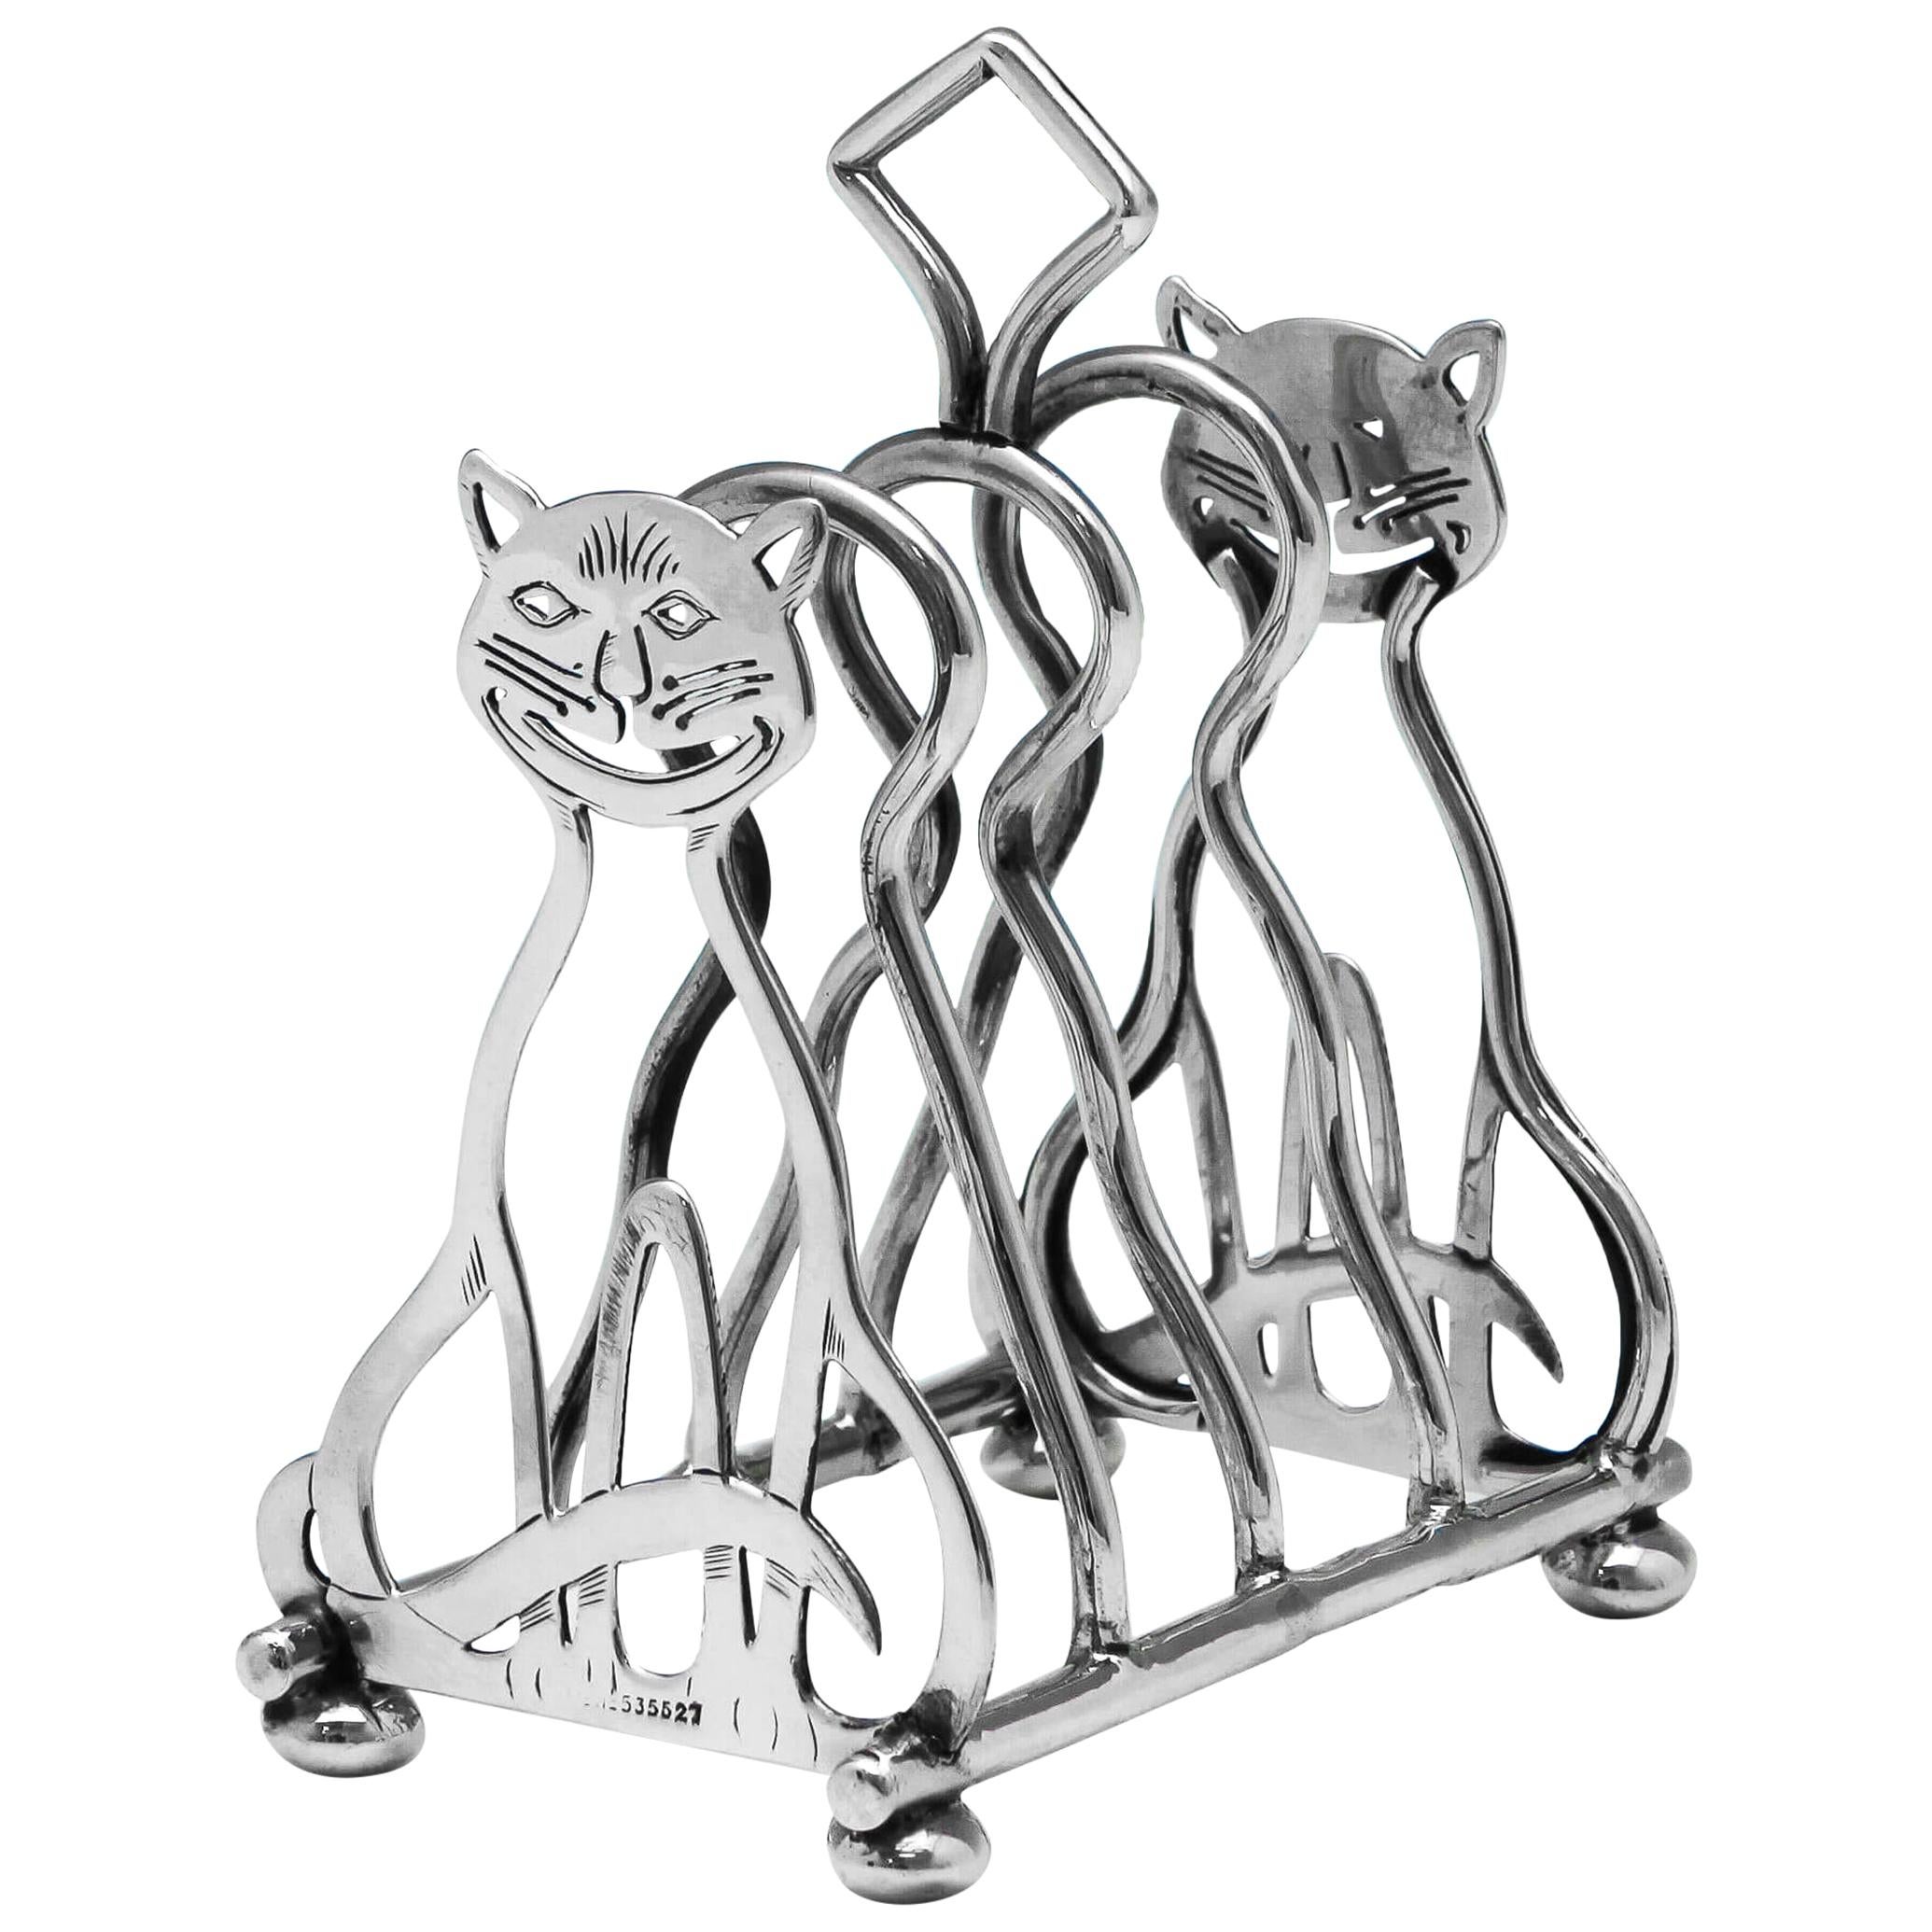 Edwardian Novelty Sterling Silver Cat Toast Rack by Levi & Salaman in 1910